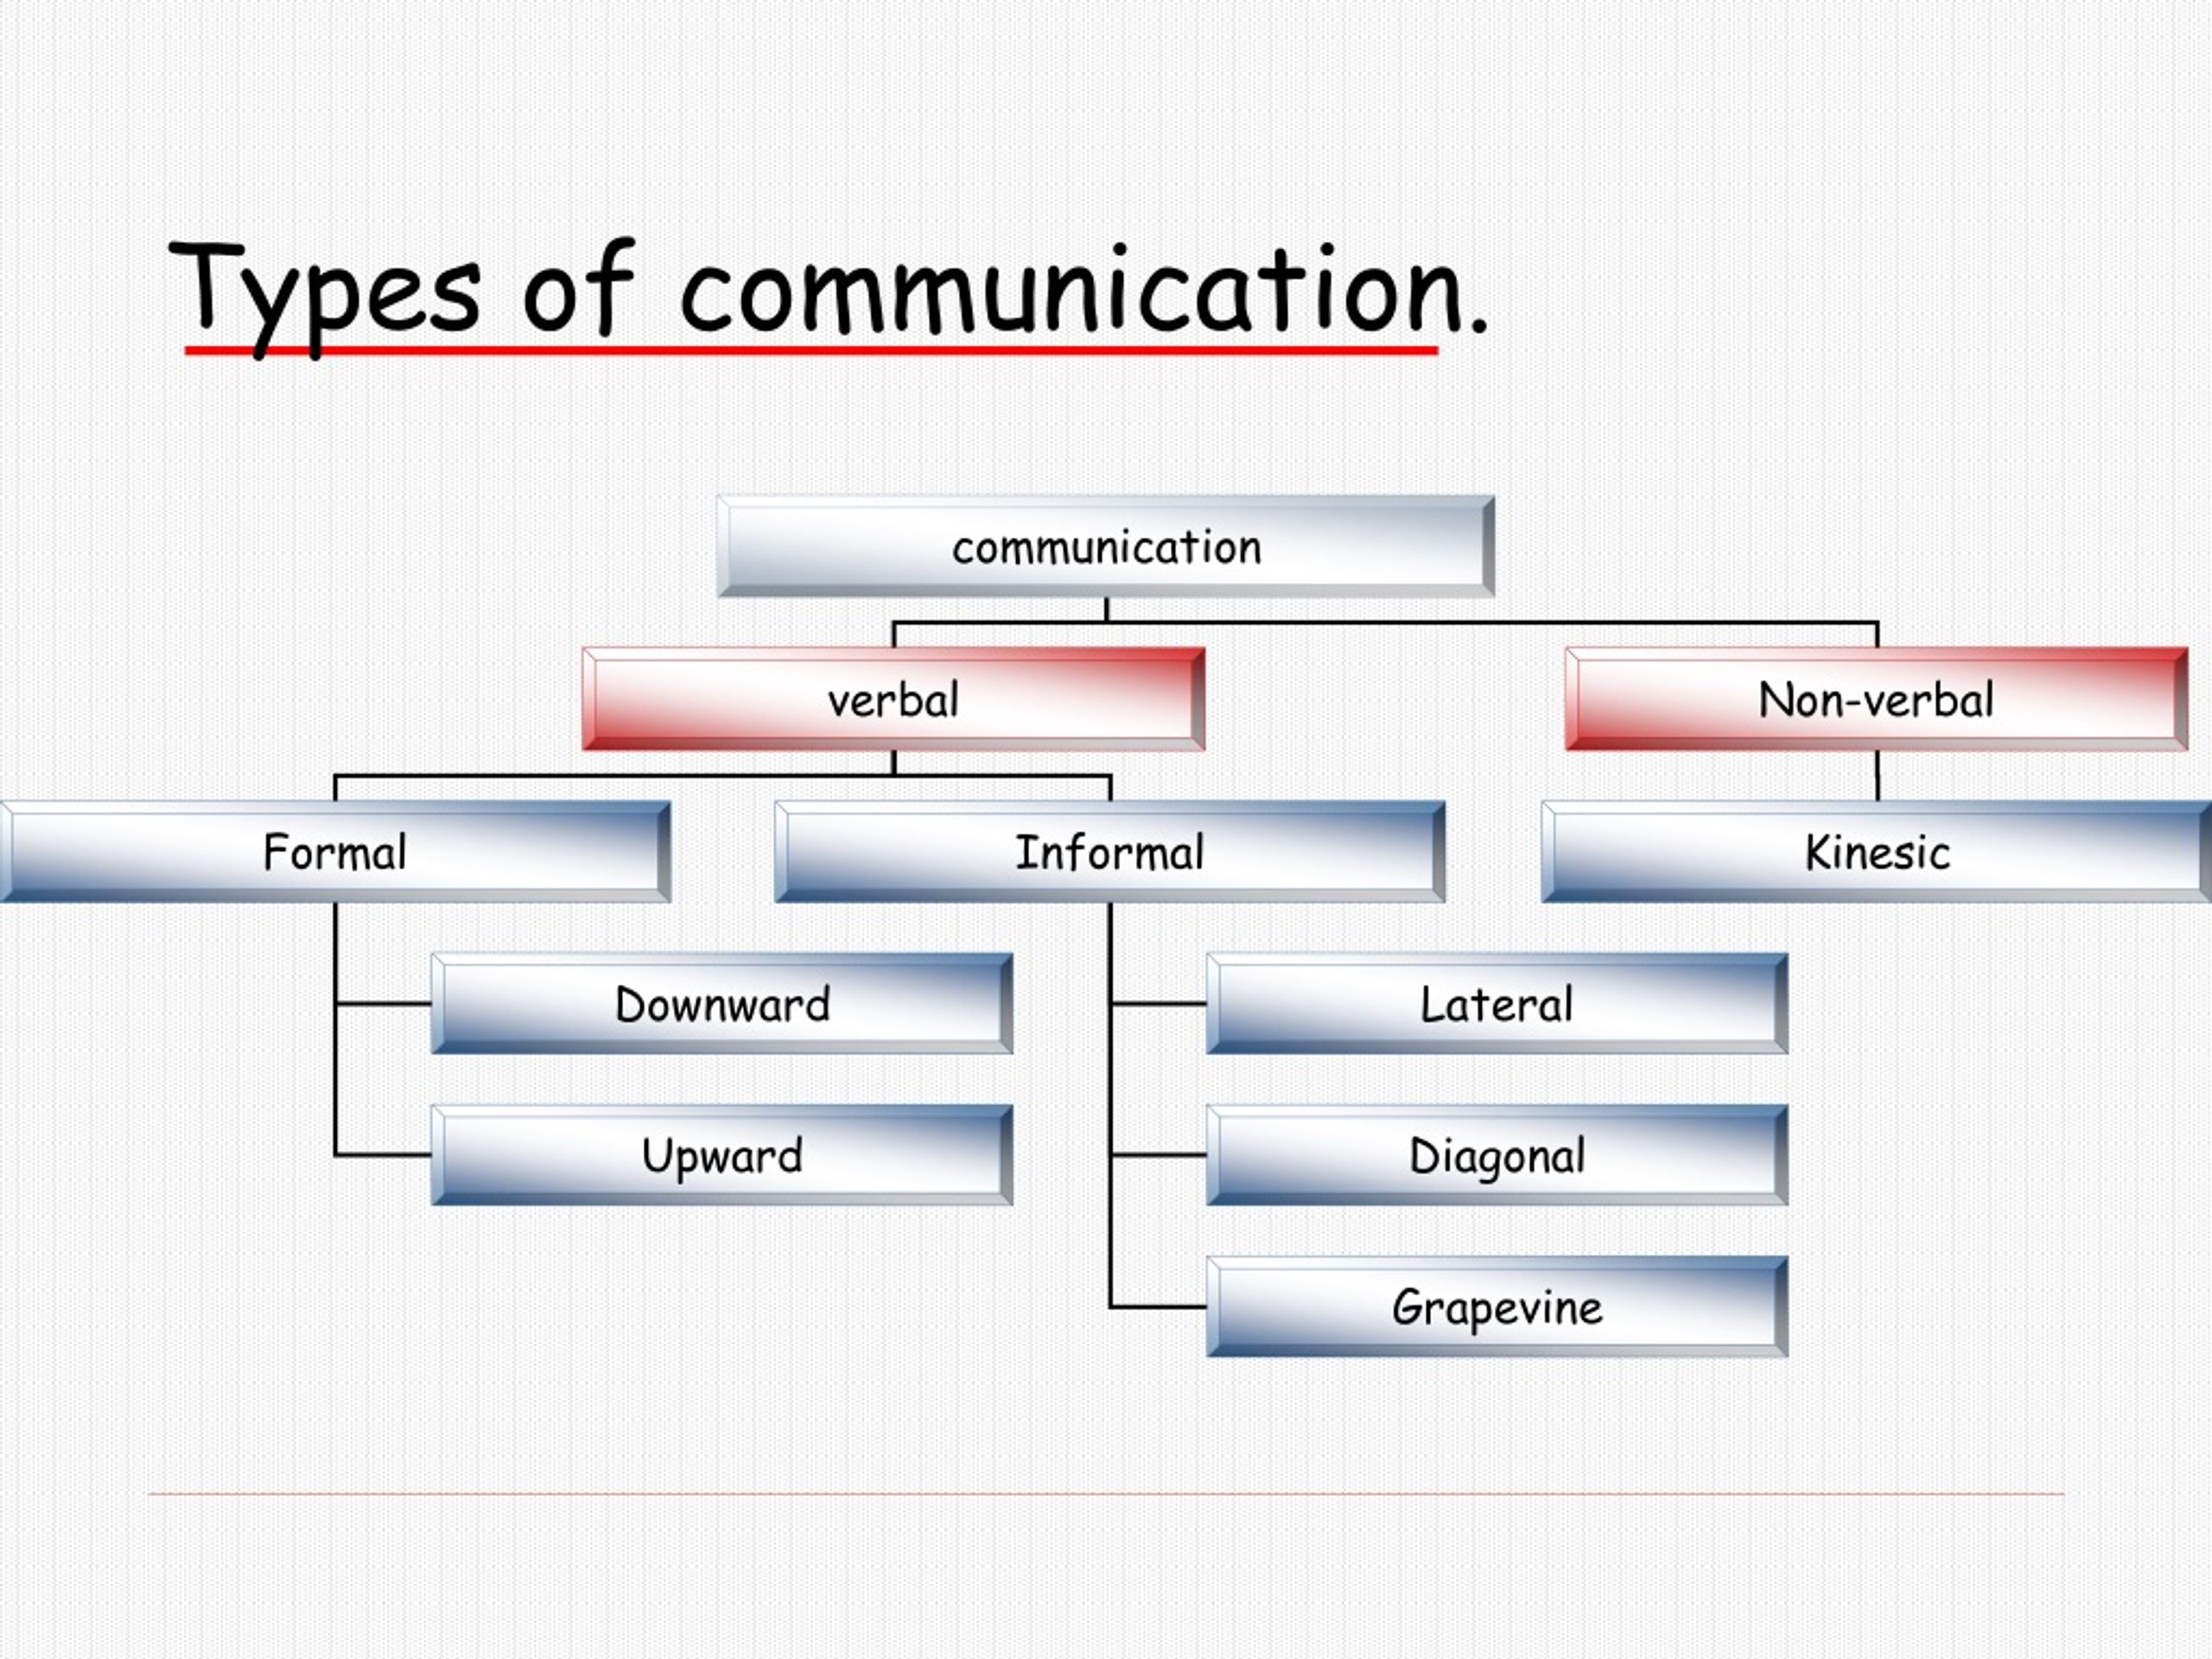 PPT - TYPES OF COMMUNICATION PowerPoint Presentation, free download ...